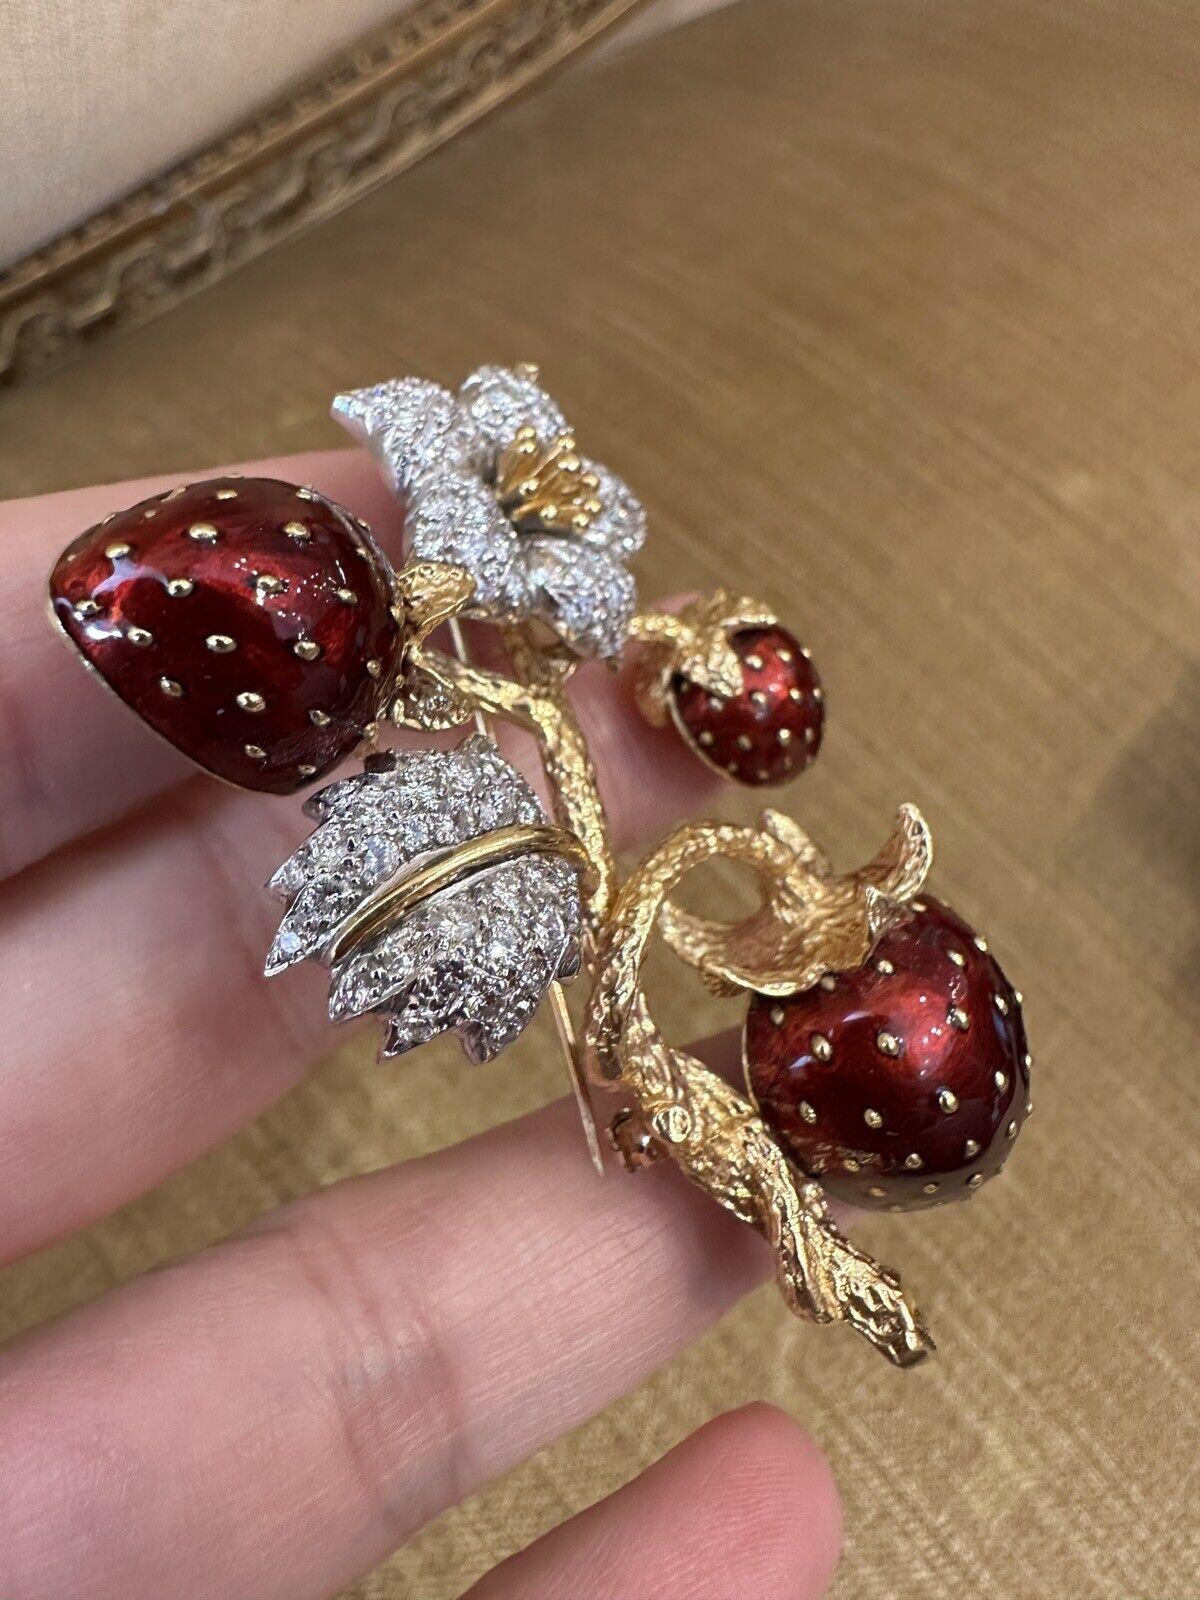 Estate Strawberry Brooch with Diamonds & Enamel in 18k Yellow Gold 

Diamond and Enamel Strawberry Brooch features three Strawberries with Red Enameling and Gold accents on a textured 18k Yellow Gold Stem, with 74 Round Brilliant Diamonds Pavé set